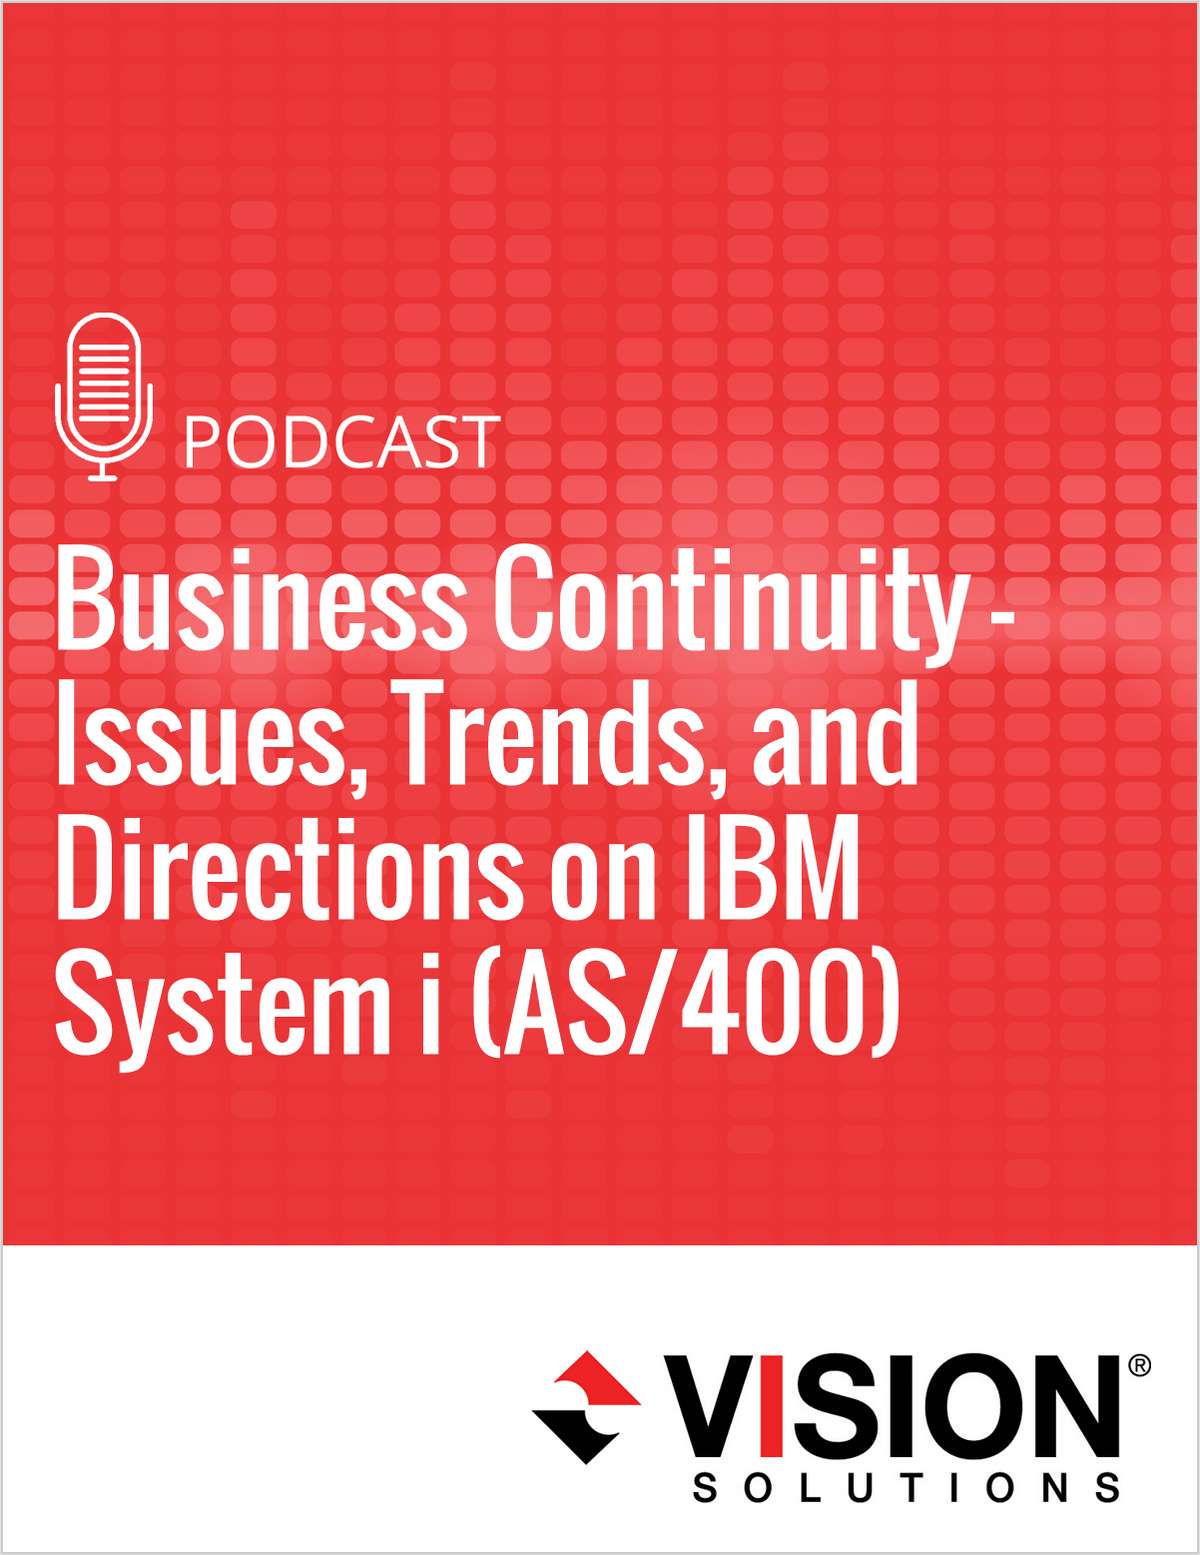 Business Continuity - Issues, Trends, and Directions on IBM System i (AS/400)